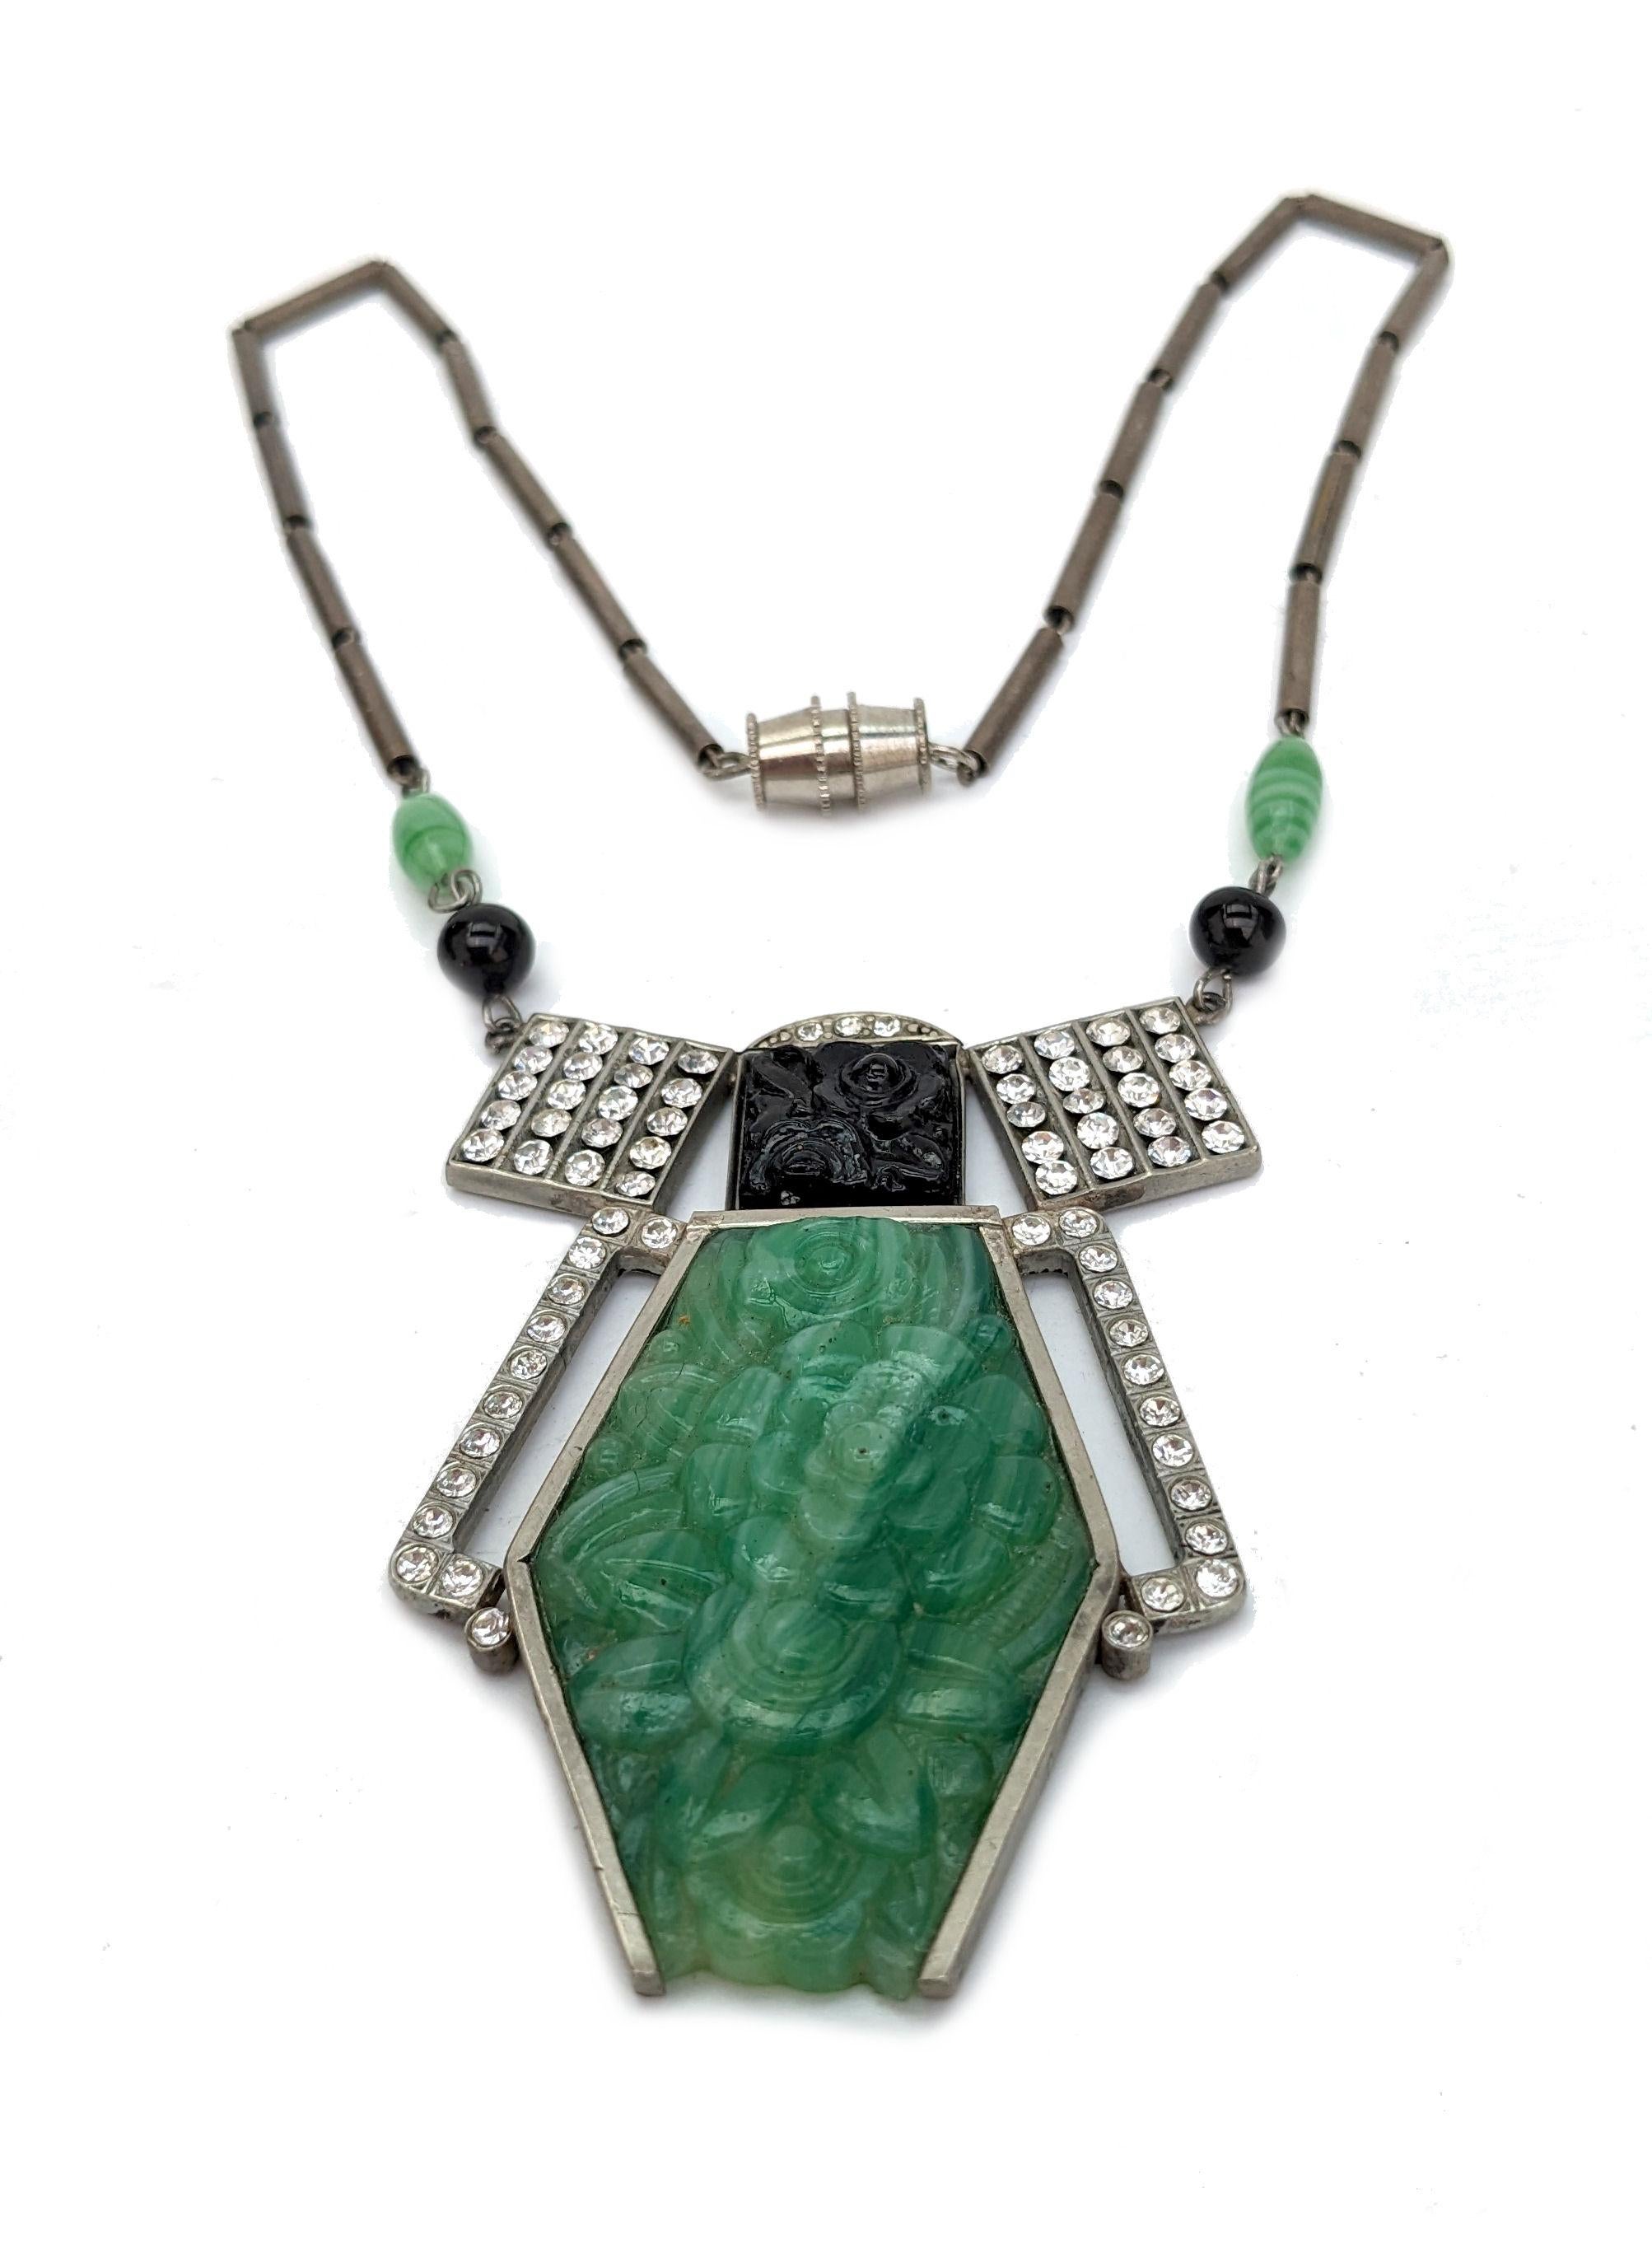 For your consideration is this fabulously stylish Art Deco necklace, dating to the early 1930's. Very much in the style of Jacob Bengal a very collectible German jewellery maker/designer. This necklace is in lovely condition with no damage to note.